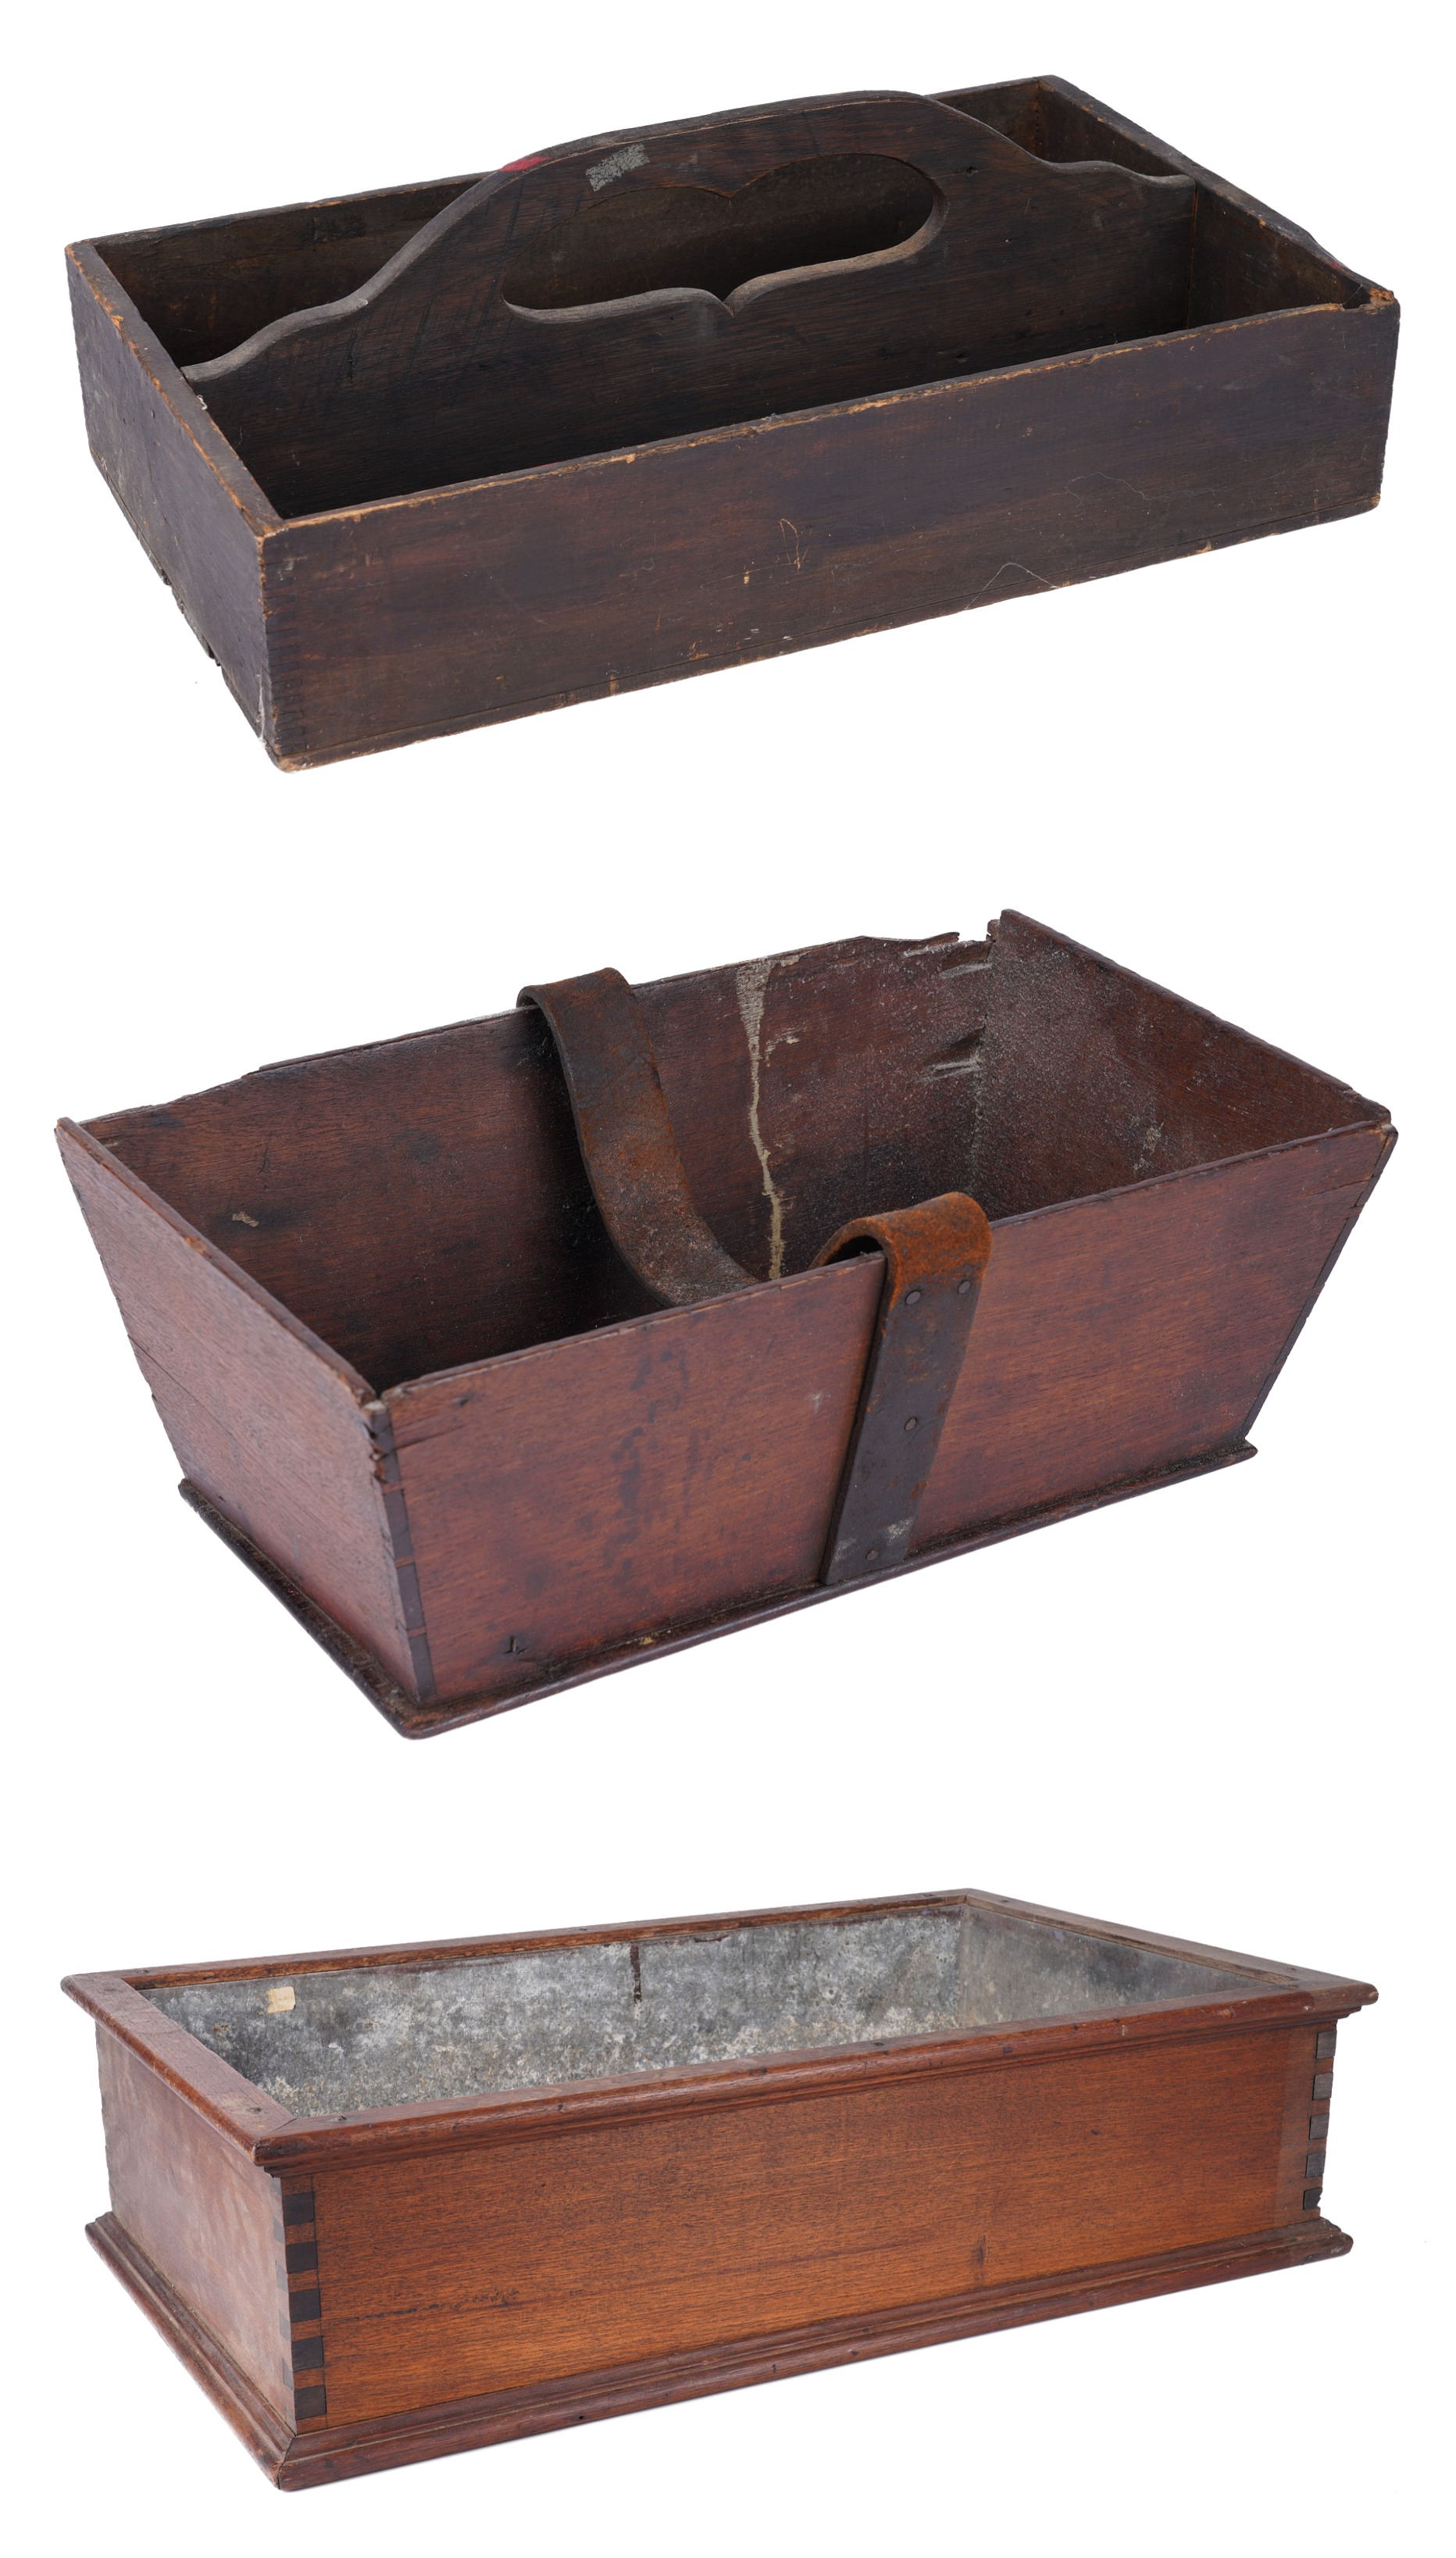 Tin Lined Wooden Planter and Cutlery 2e211a